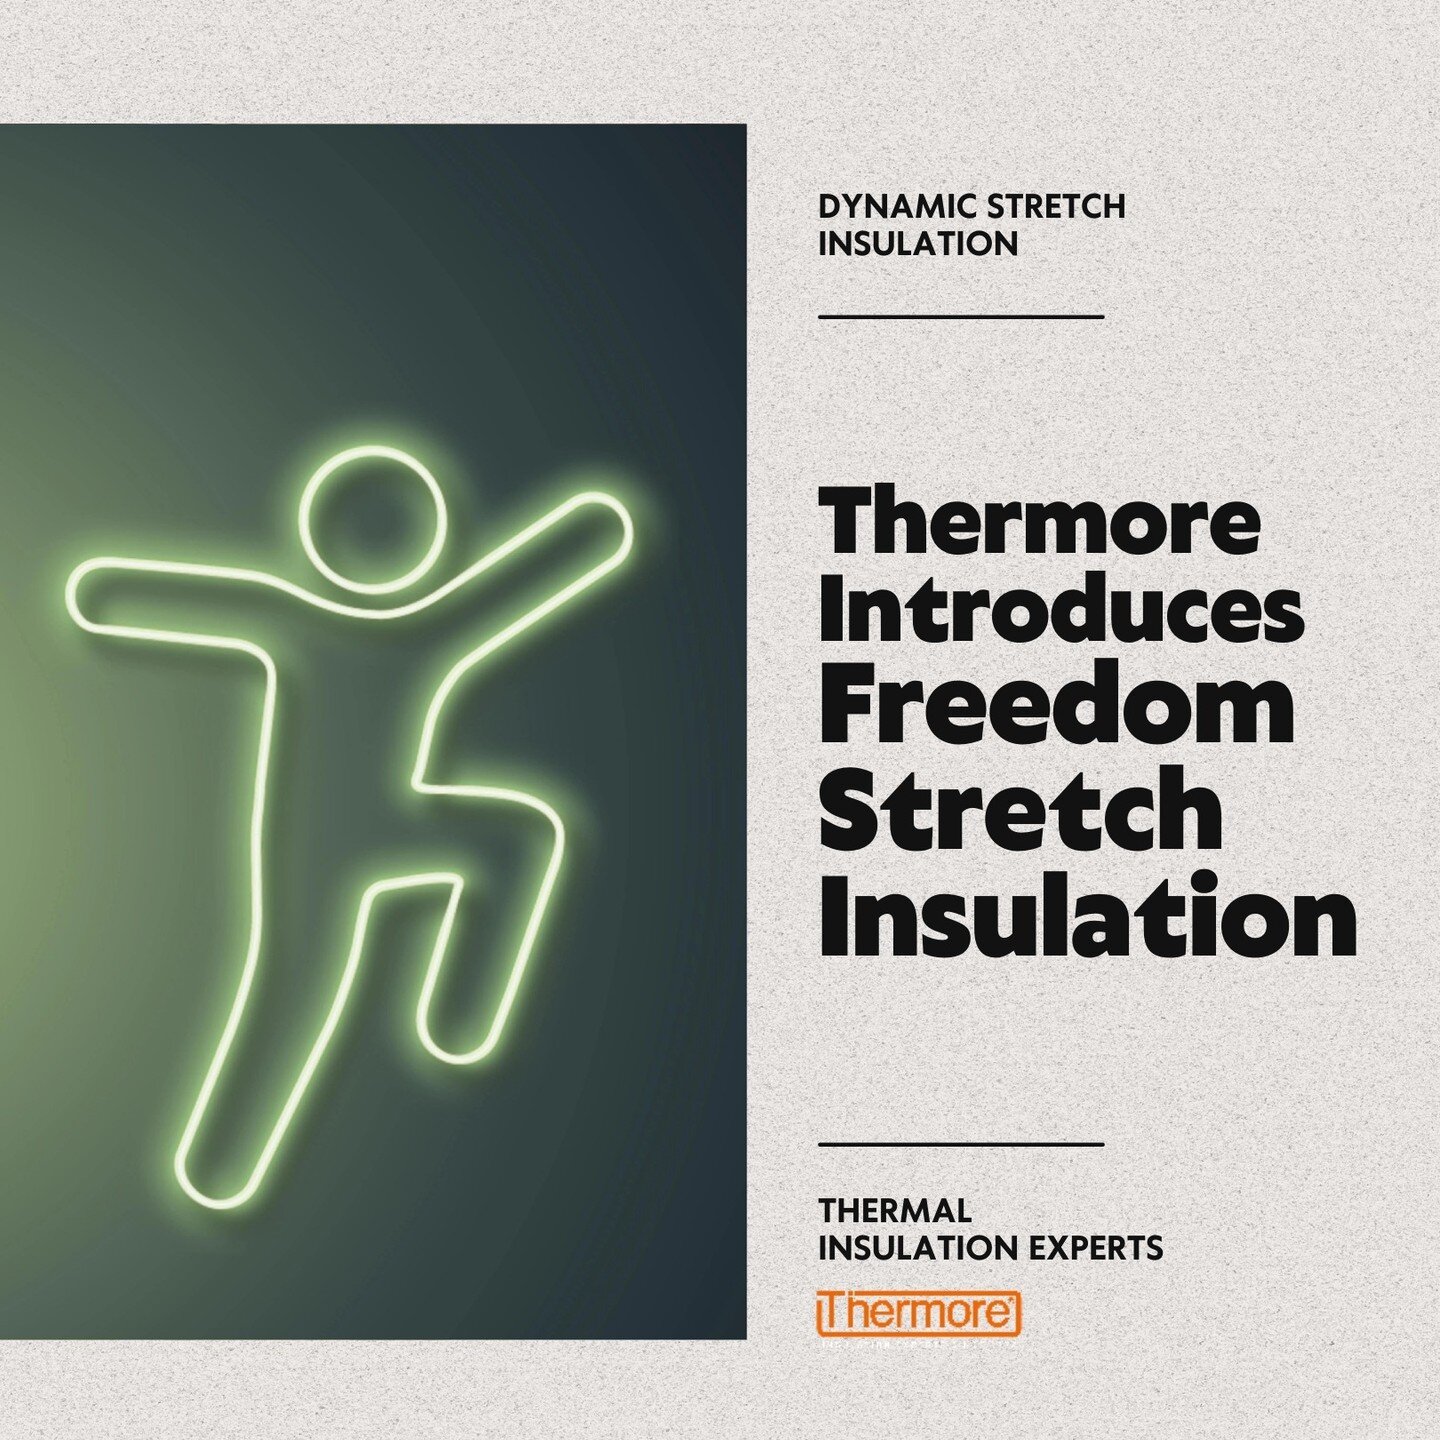 Let's learn about the latest thermal insulation tech!
- 
🌟Made from 50% post-consumer recycled polyester, this material doesn't just keep you warm&mdash;it flexes and moves with your body, like it's dancing to your every move! 💃 Even as you breathe